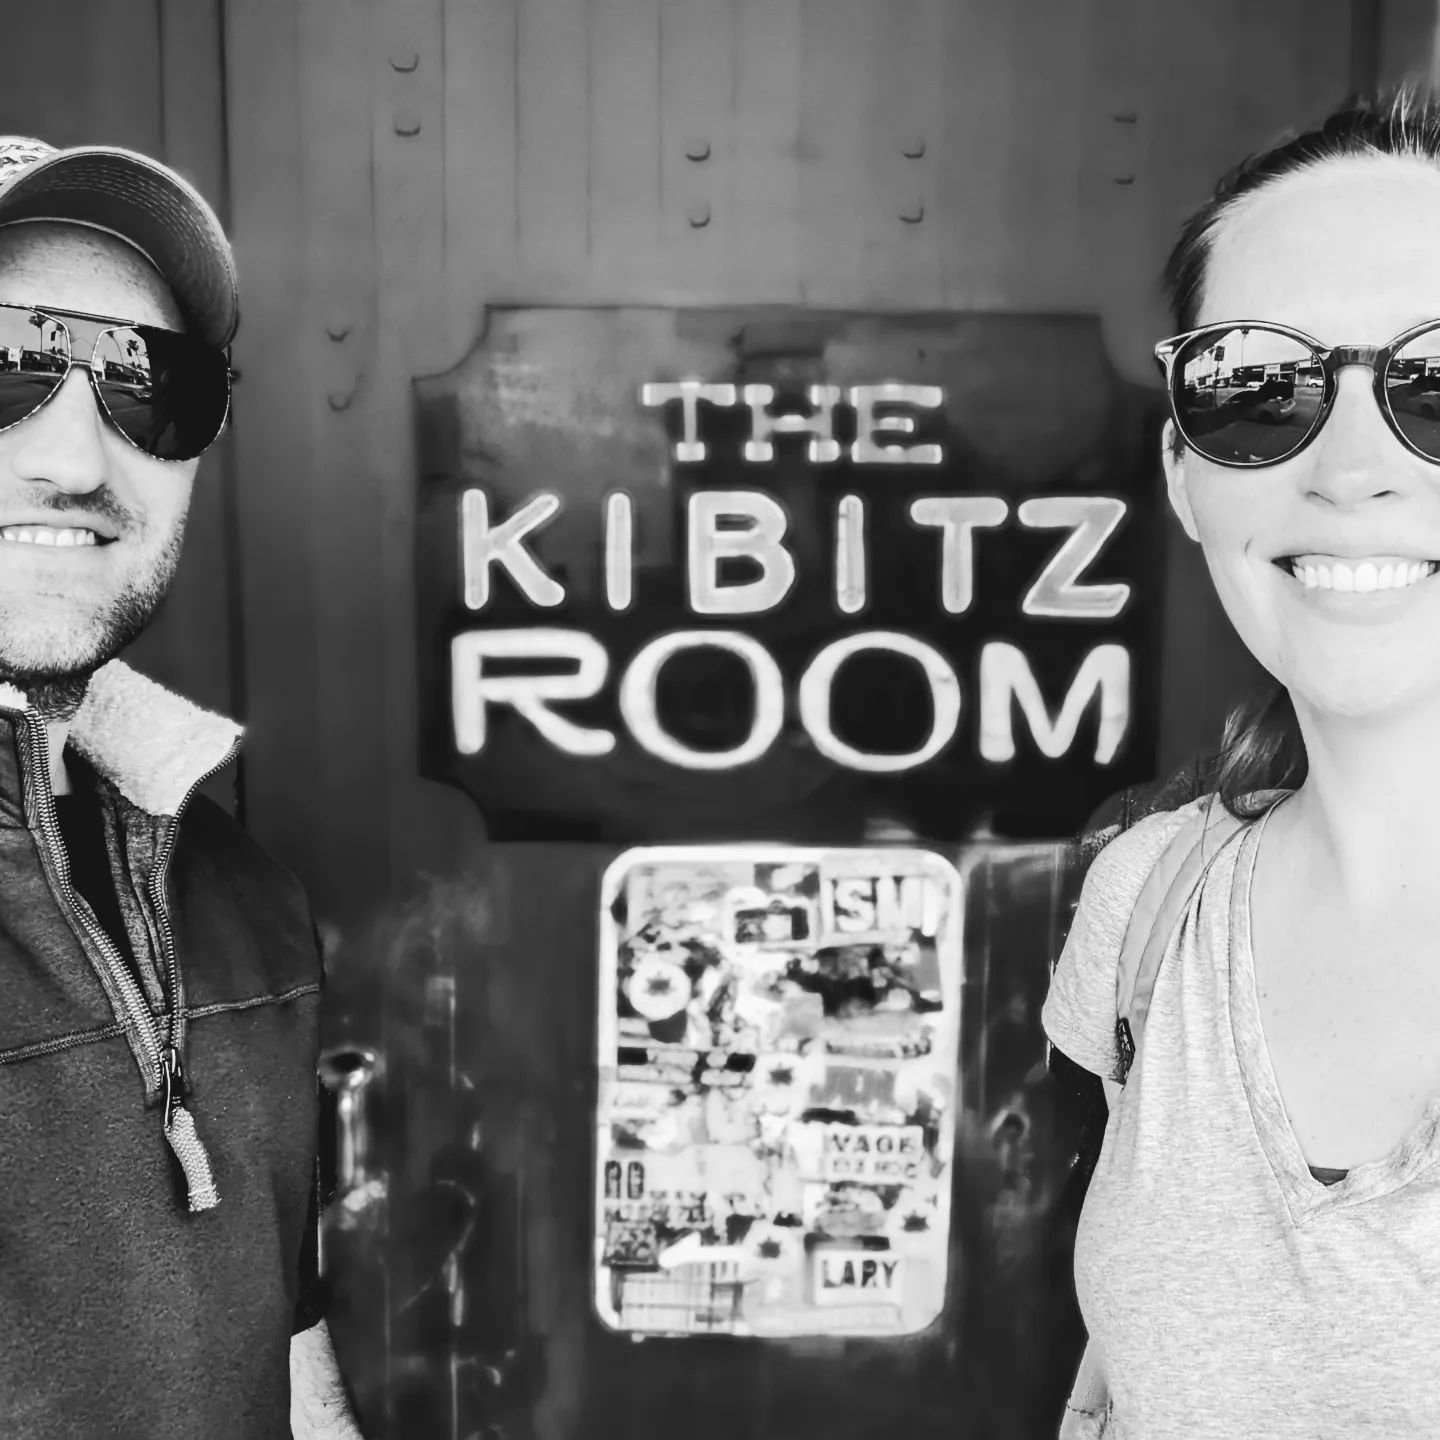 A little R&amp;R in #thegoldenstate not complete without a trip to the infamous @kibitzroombar and @canters_deli an LA #rocknroll institution 🤘👩&zwj;🎤🤘👩&zwj;🎤🤘👩&zwj;🎤 We're back on the East Coast and ready to get after it this weekend!!! @di